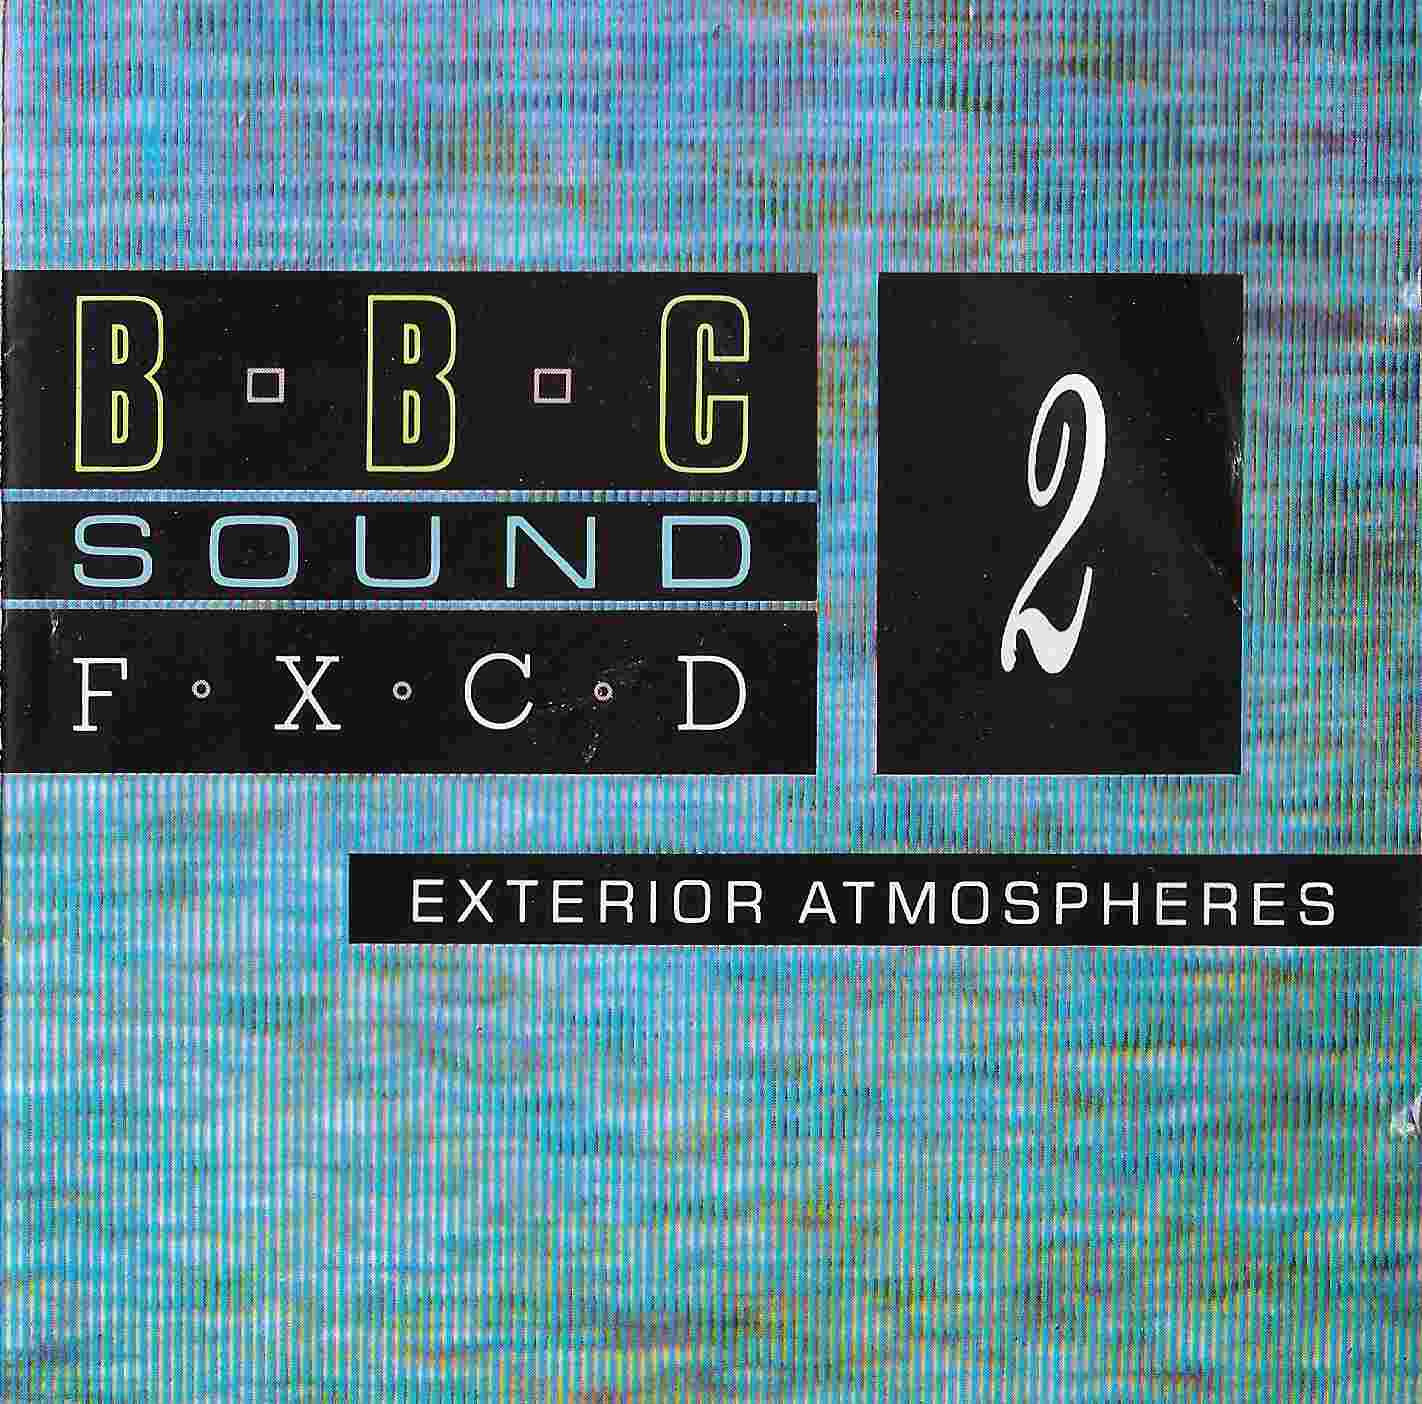 Picture of BBCCD SFX002 Exterior atmospheres by artist Various from the BBC cds - Records and Tapes library